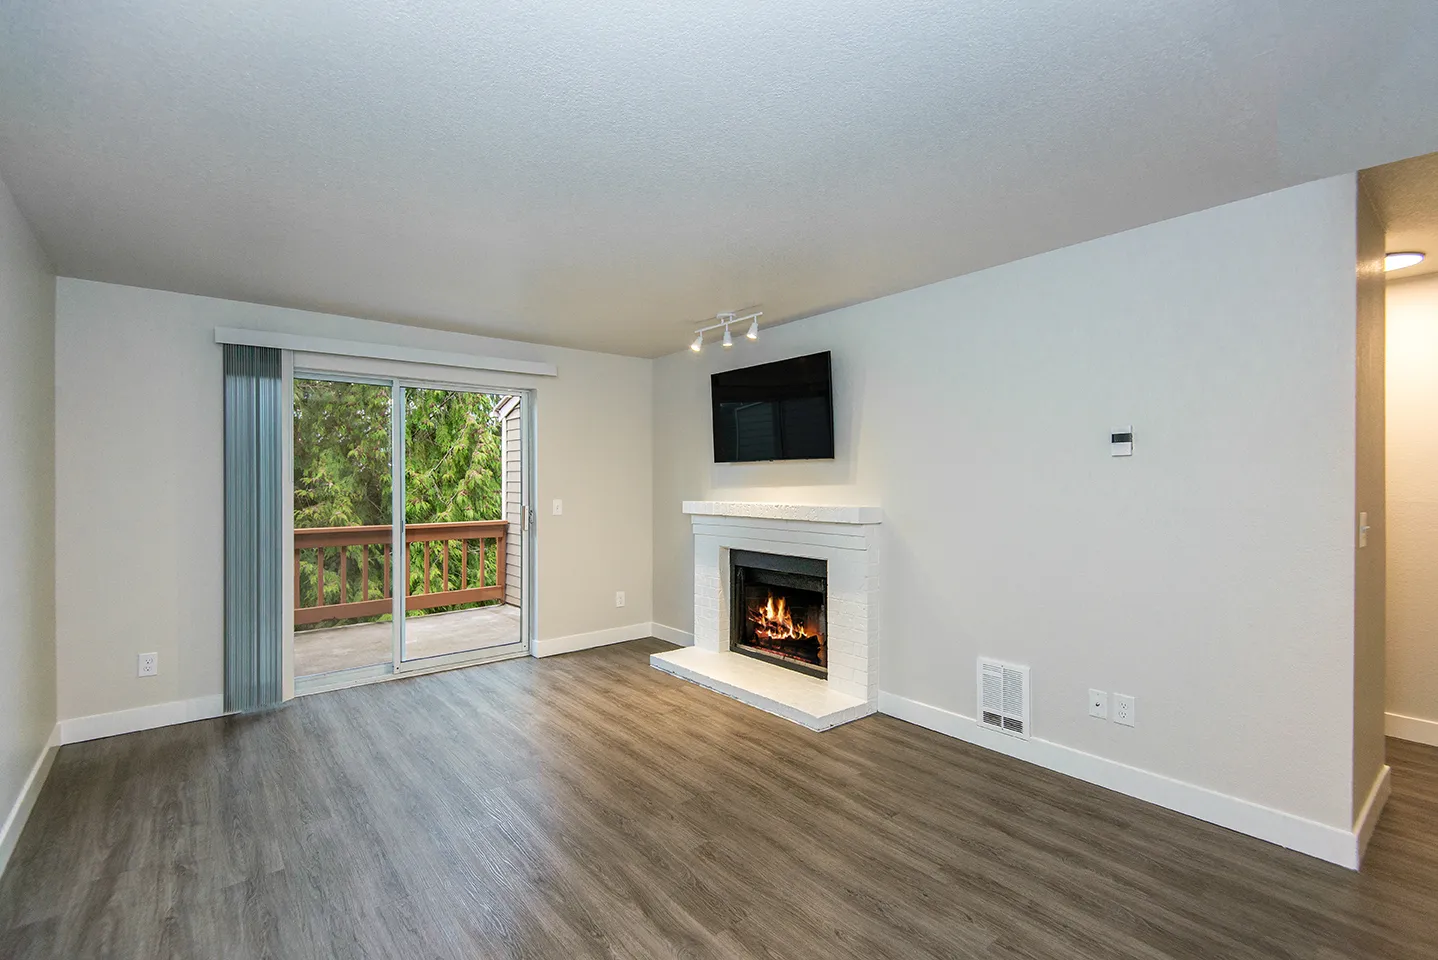 Westvue Woodinville Apartments - B32